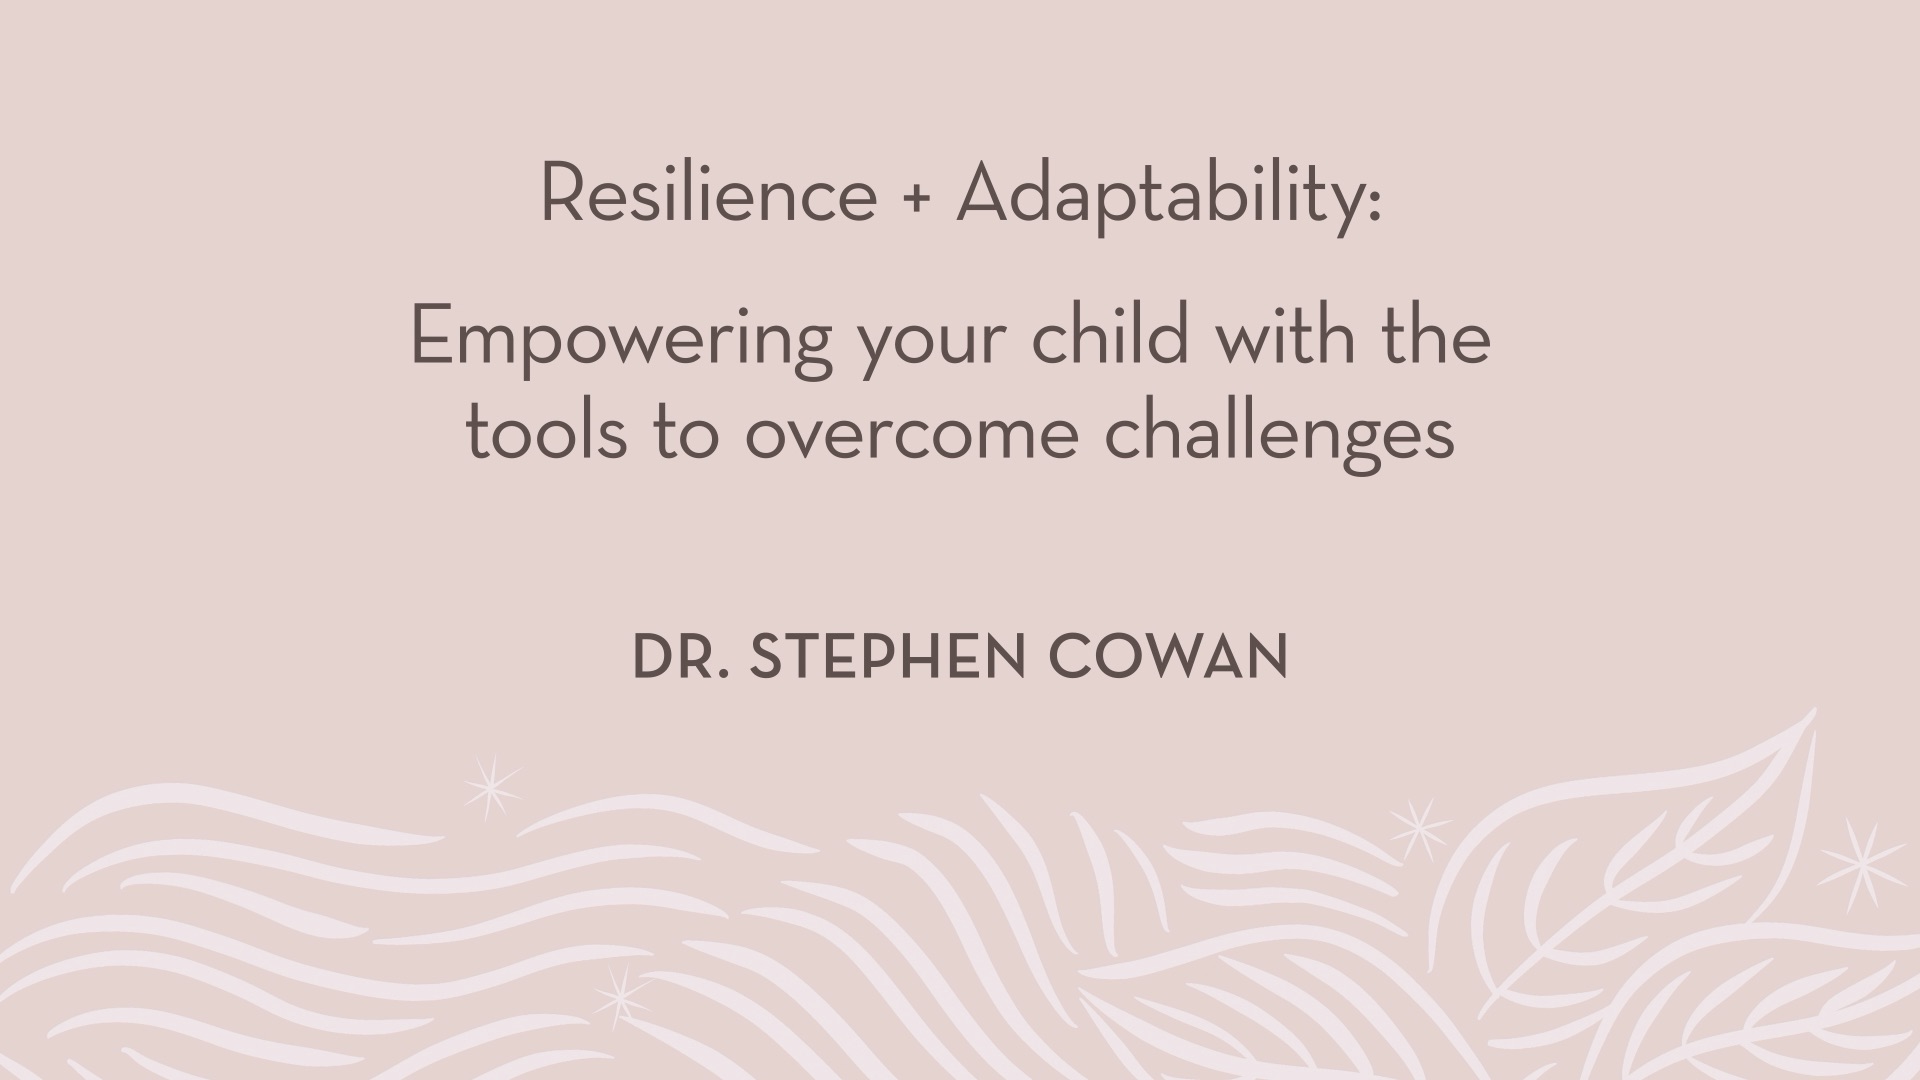 Dr. Cowan | Resilience + Adaptability - Empowering your child with the tools to overcome challenges